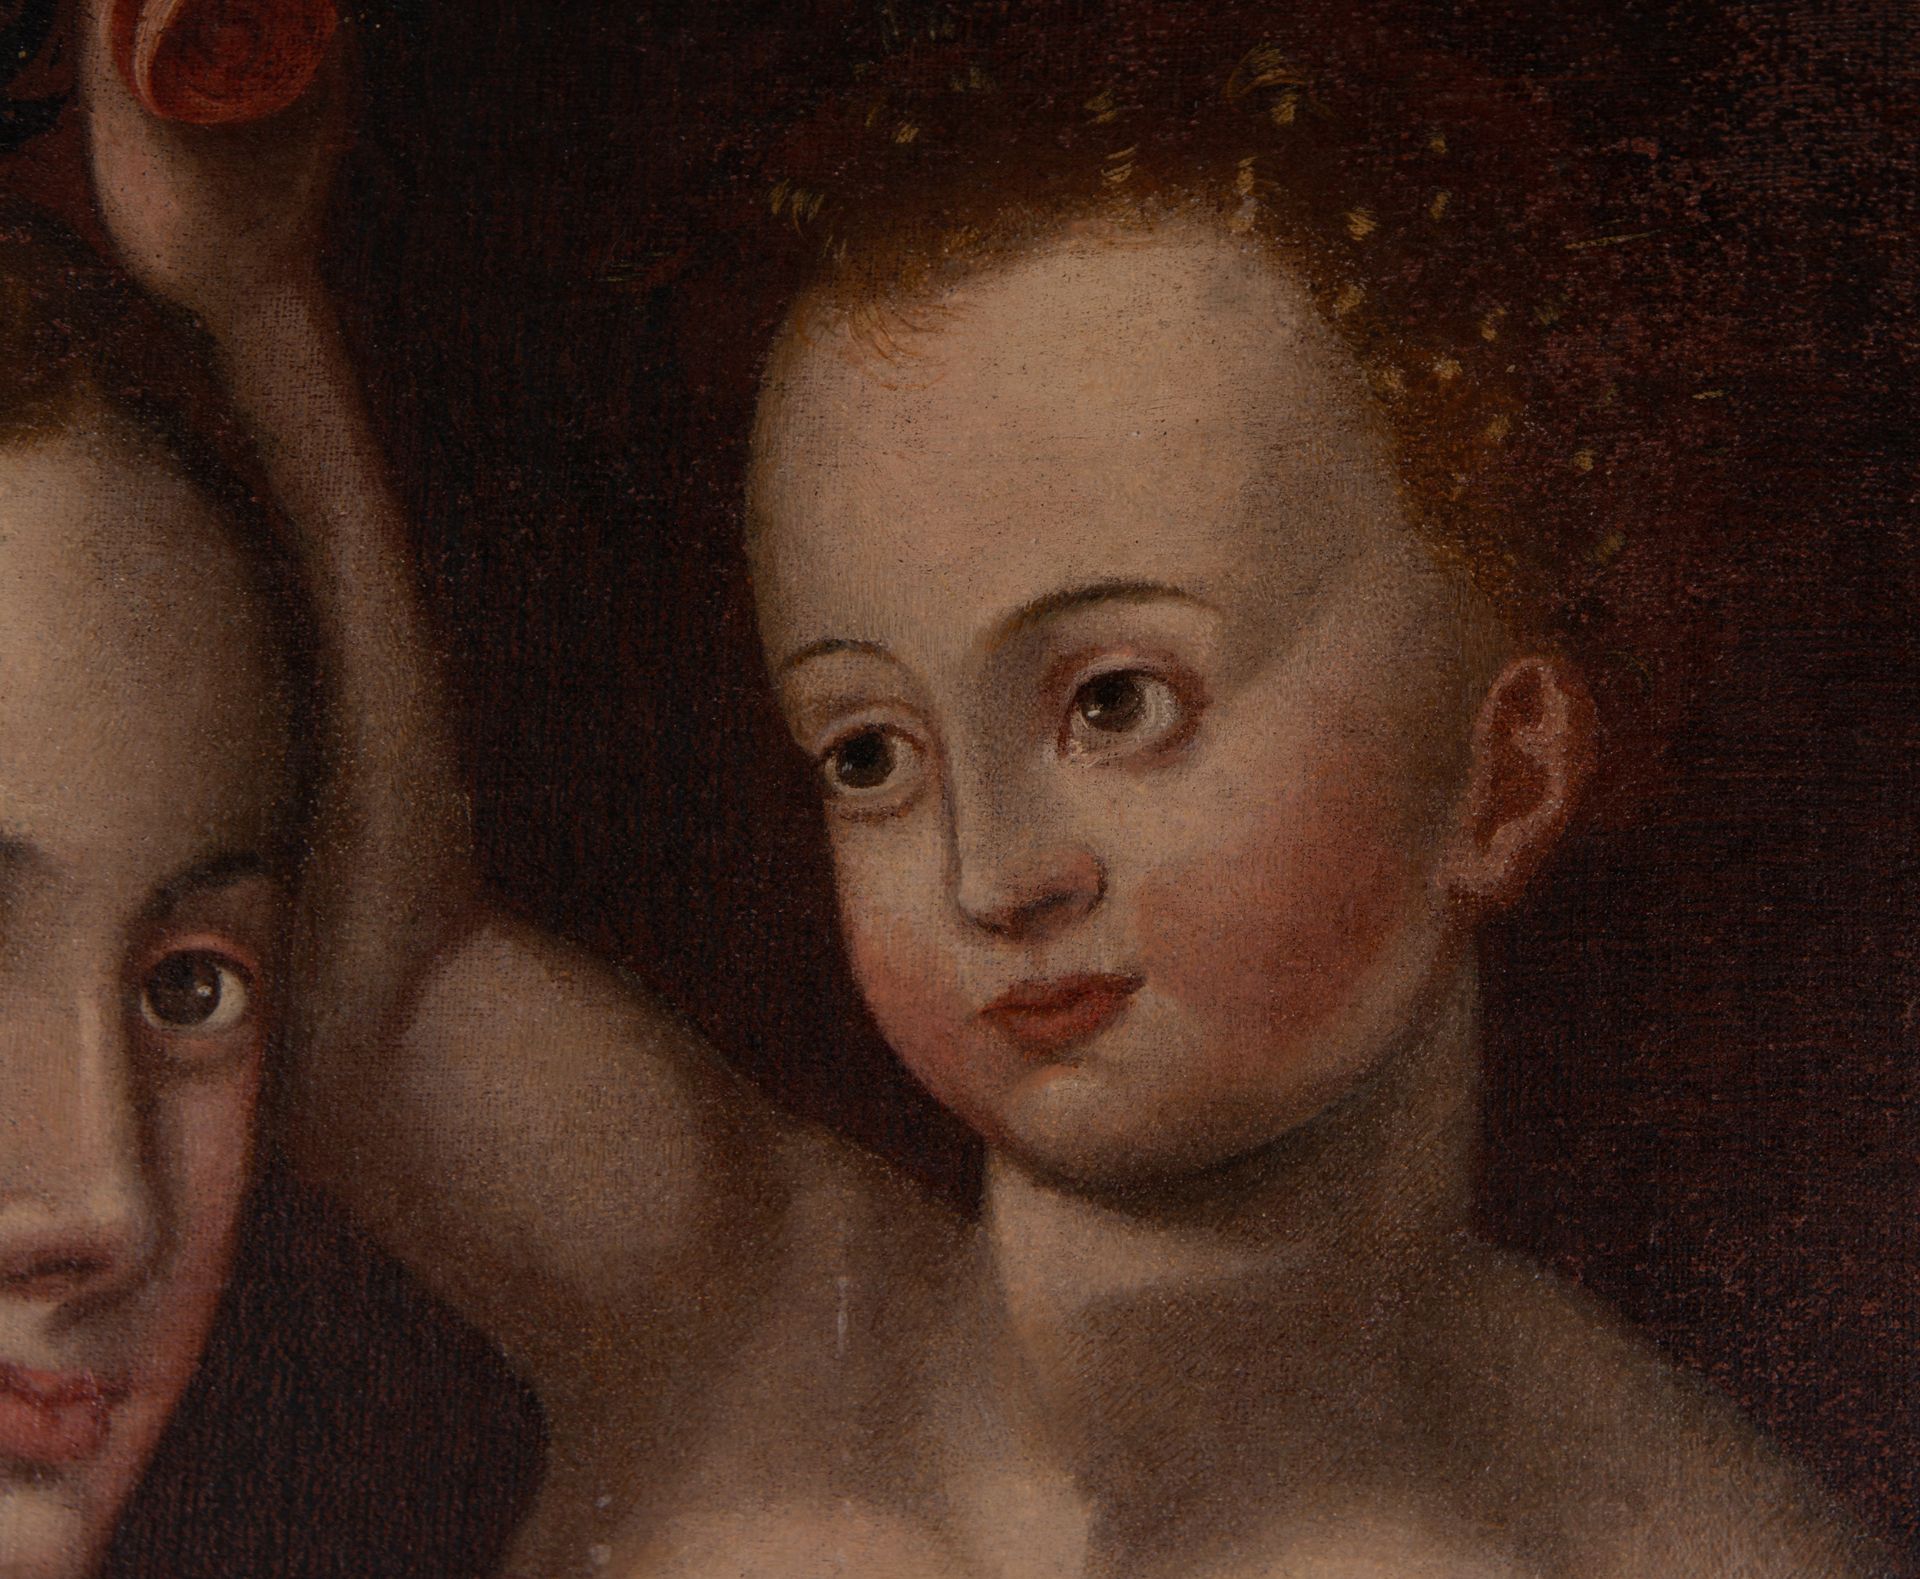 Virgin with Child in her arms, Italian school of the 17th century - Image 7 of 10